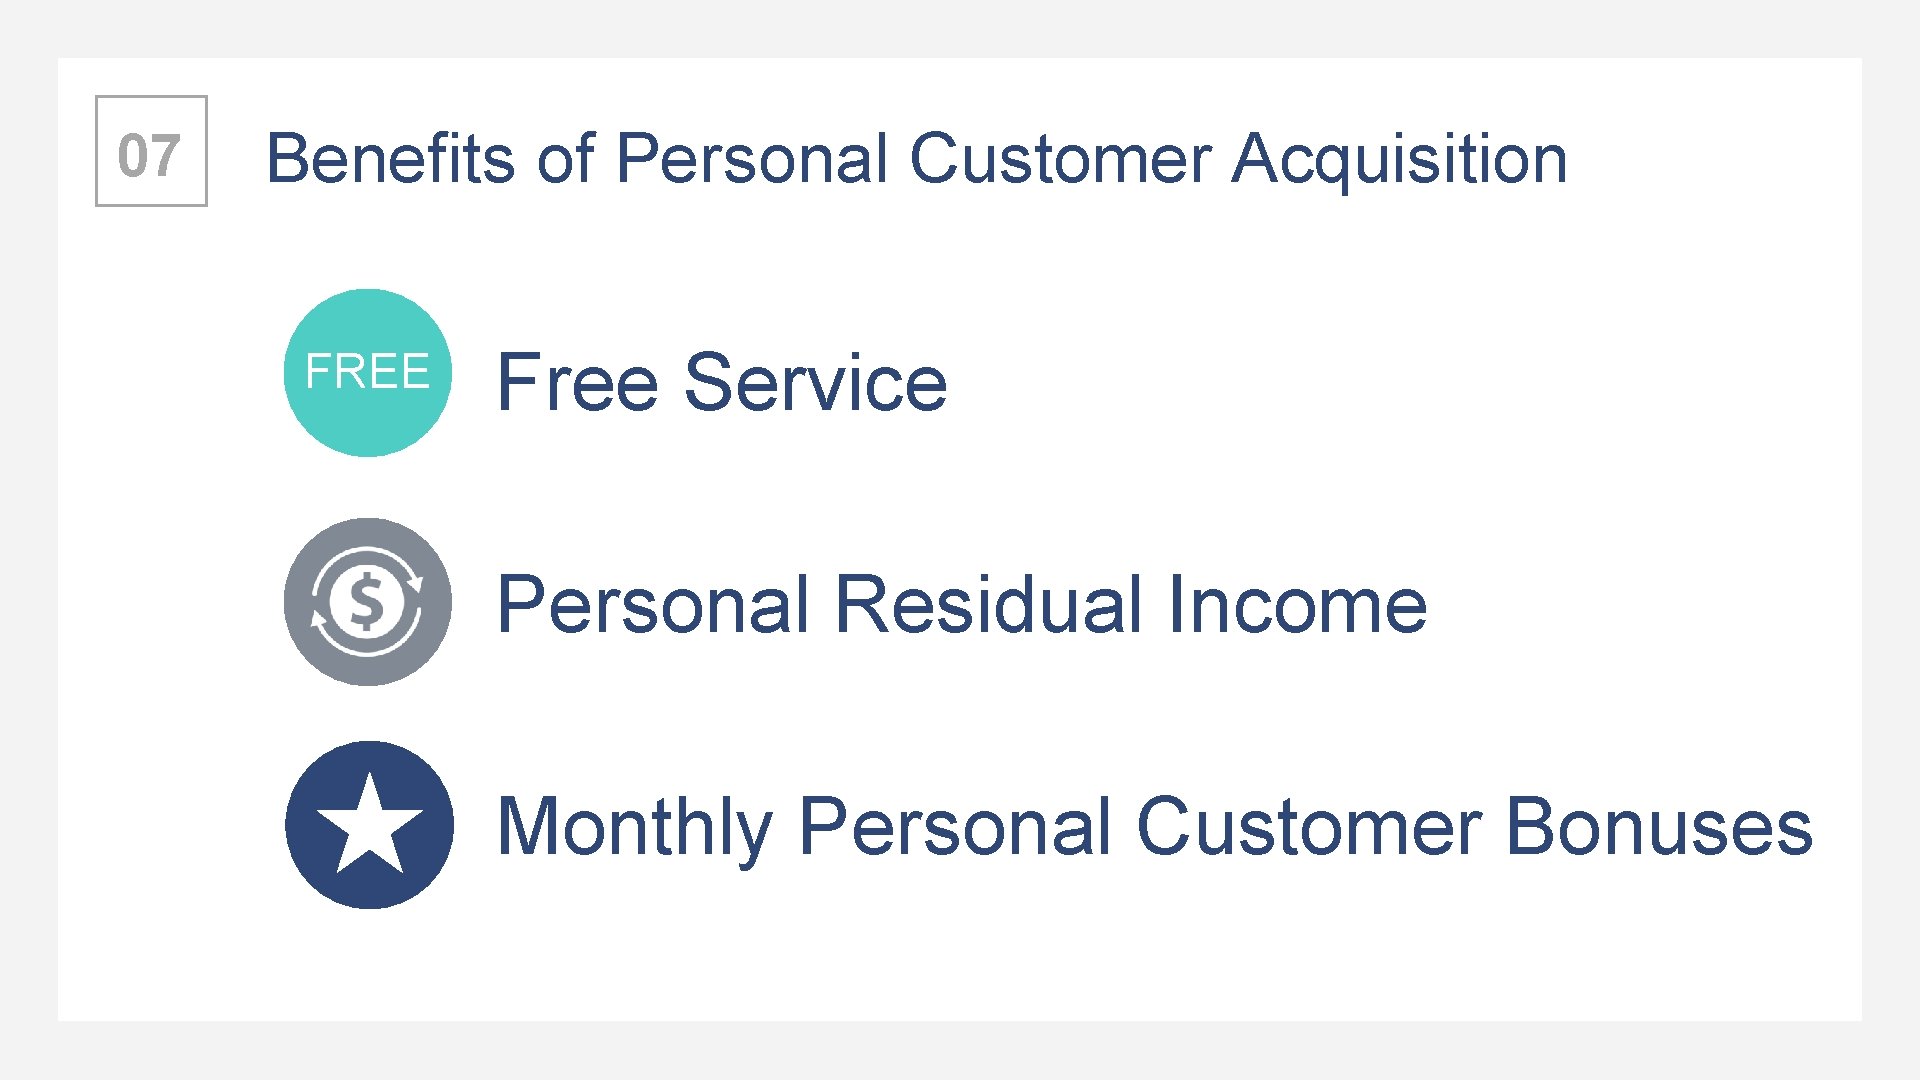 07 Benefits of Personal Customer Acquisition FREE Free Service Personal Residual Income Monthly Personal